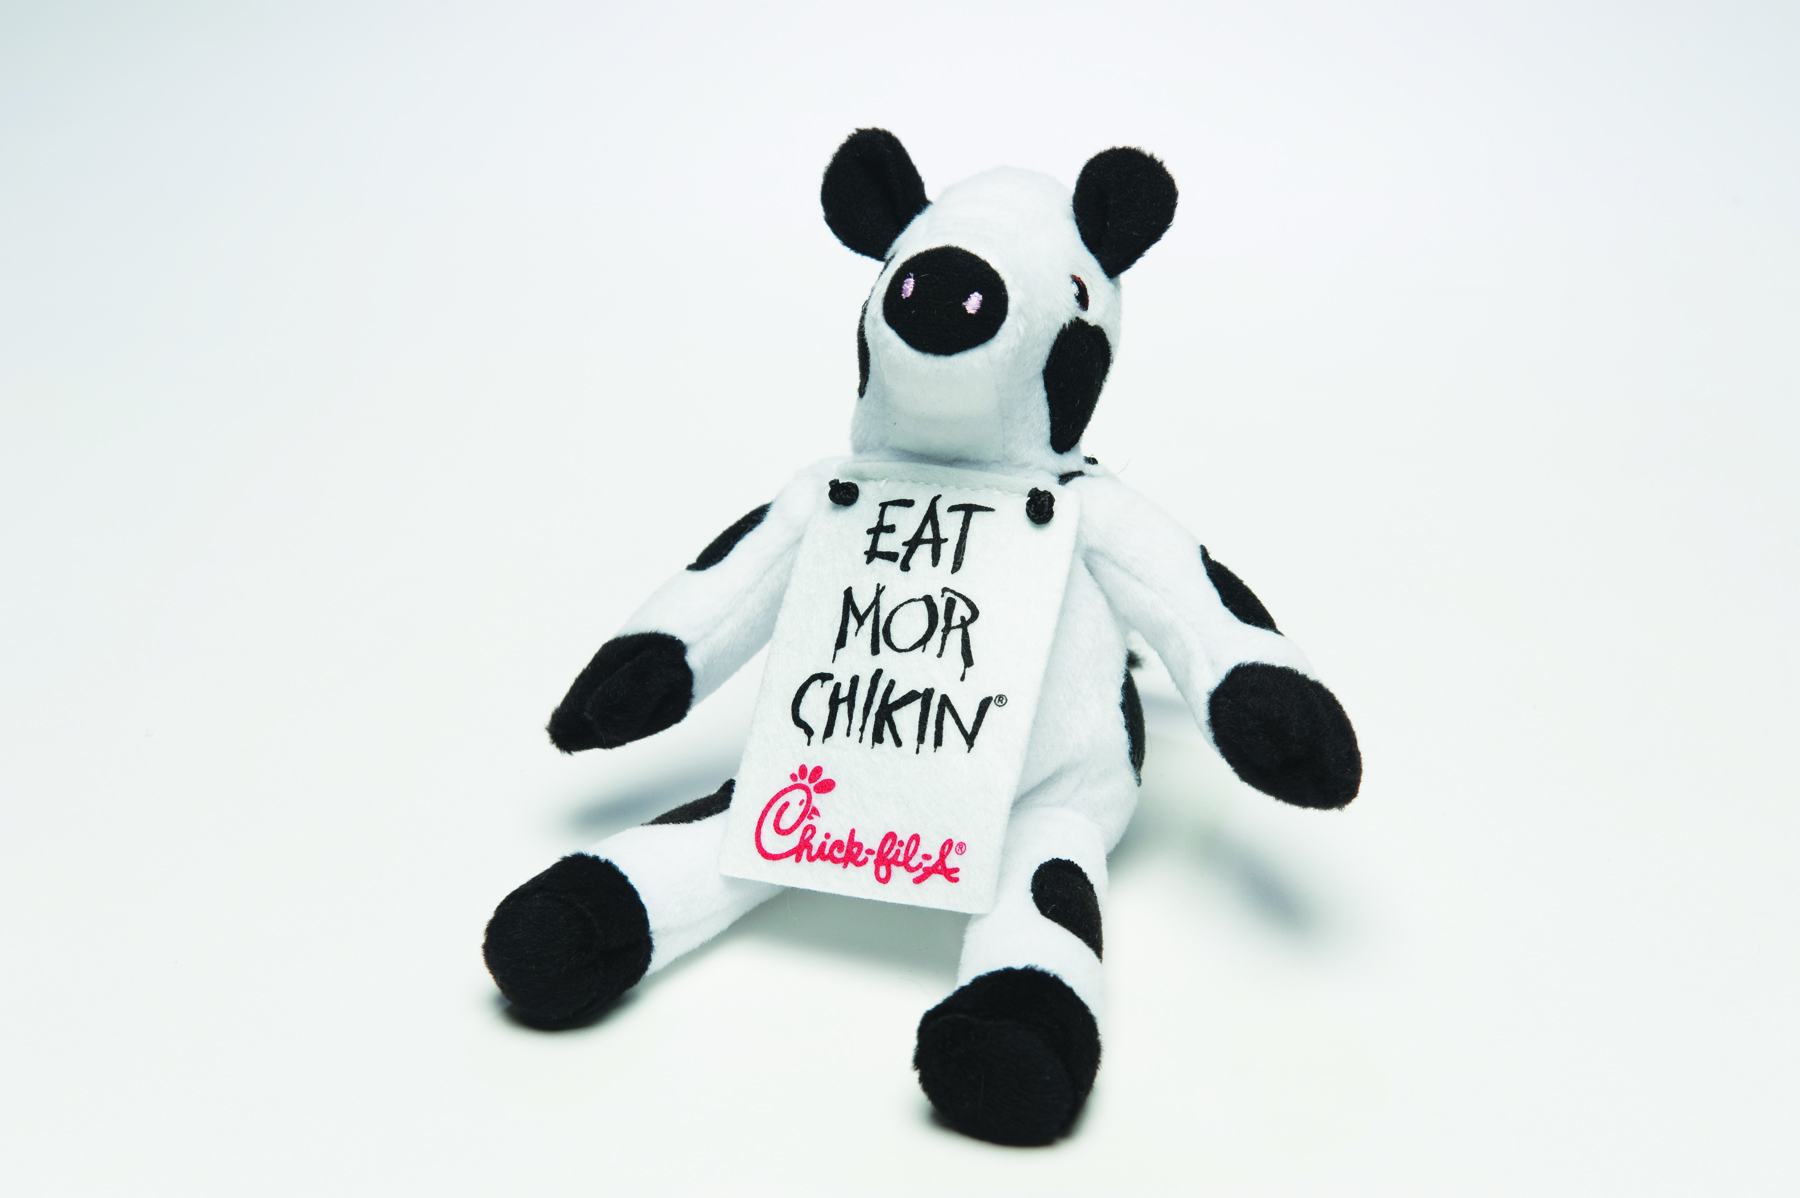 1998 – The first Plush Cow is produced